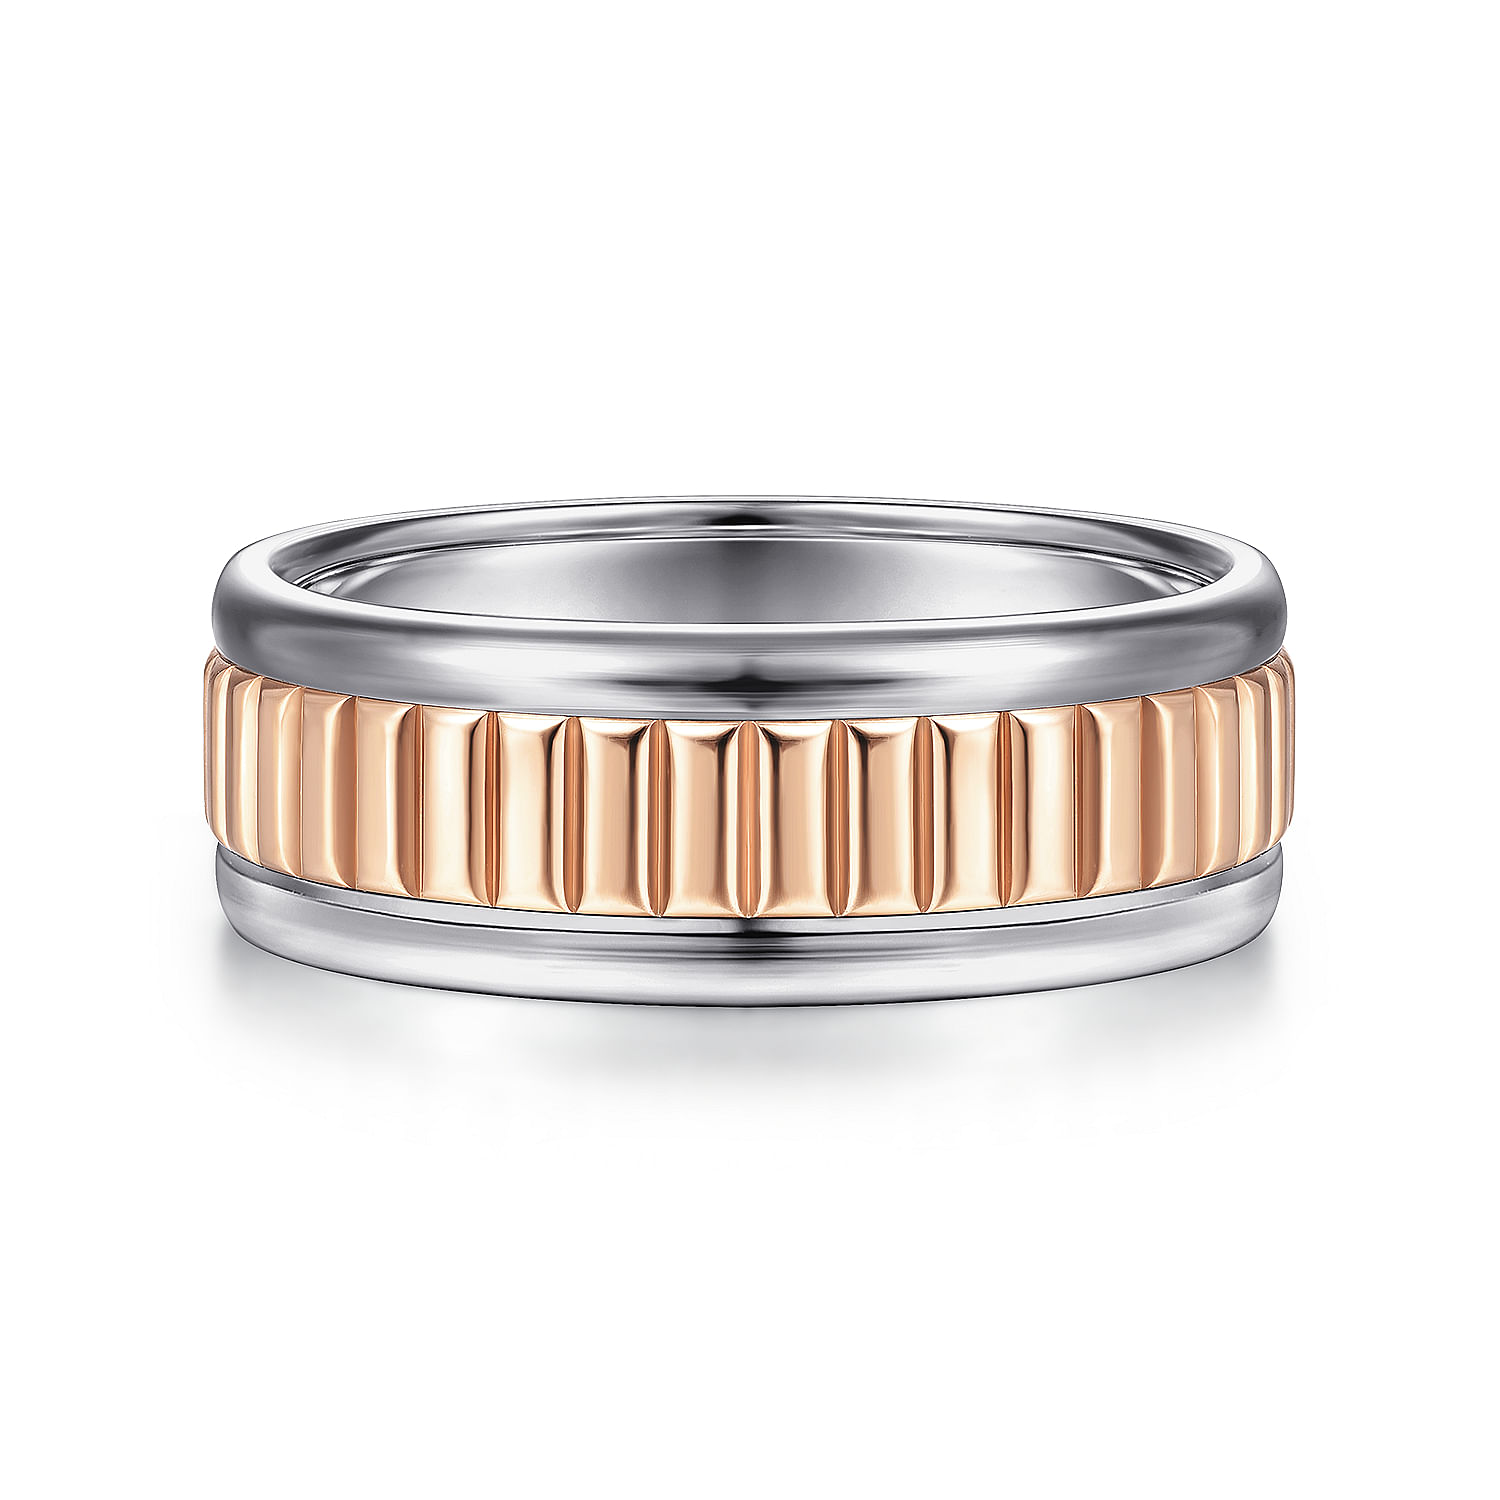 14K White-Rose Gold 8mm - Two Tone Carved Men's Wedding Band in High Polish Finish